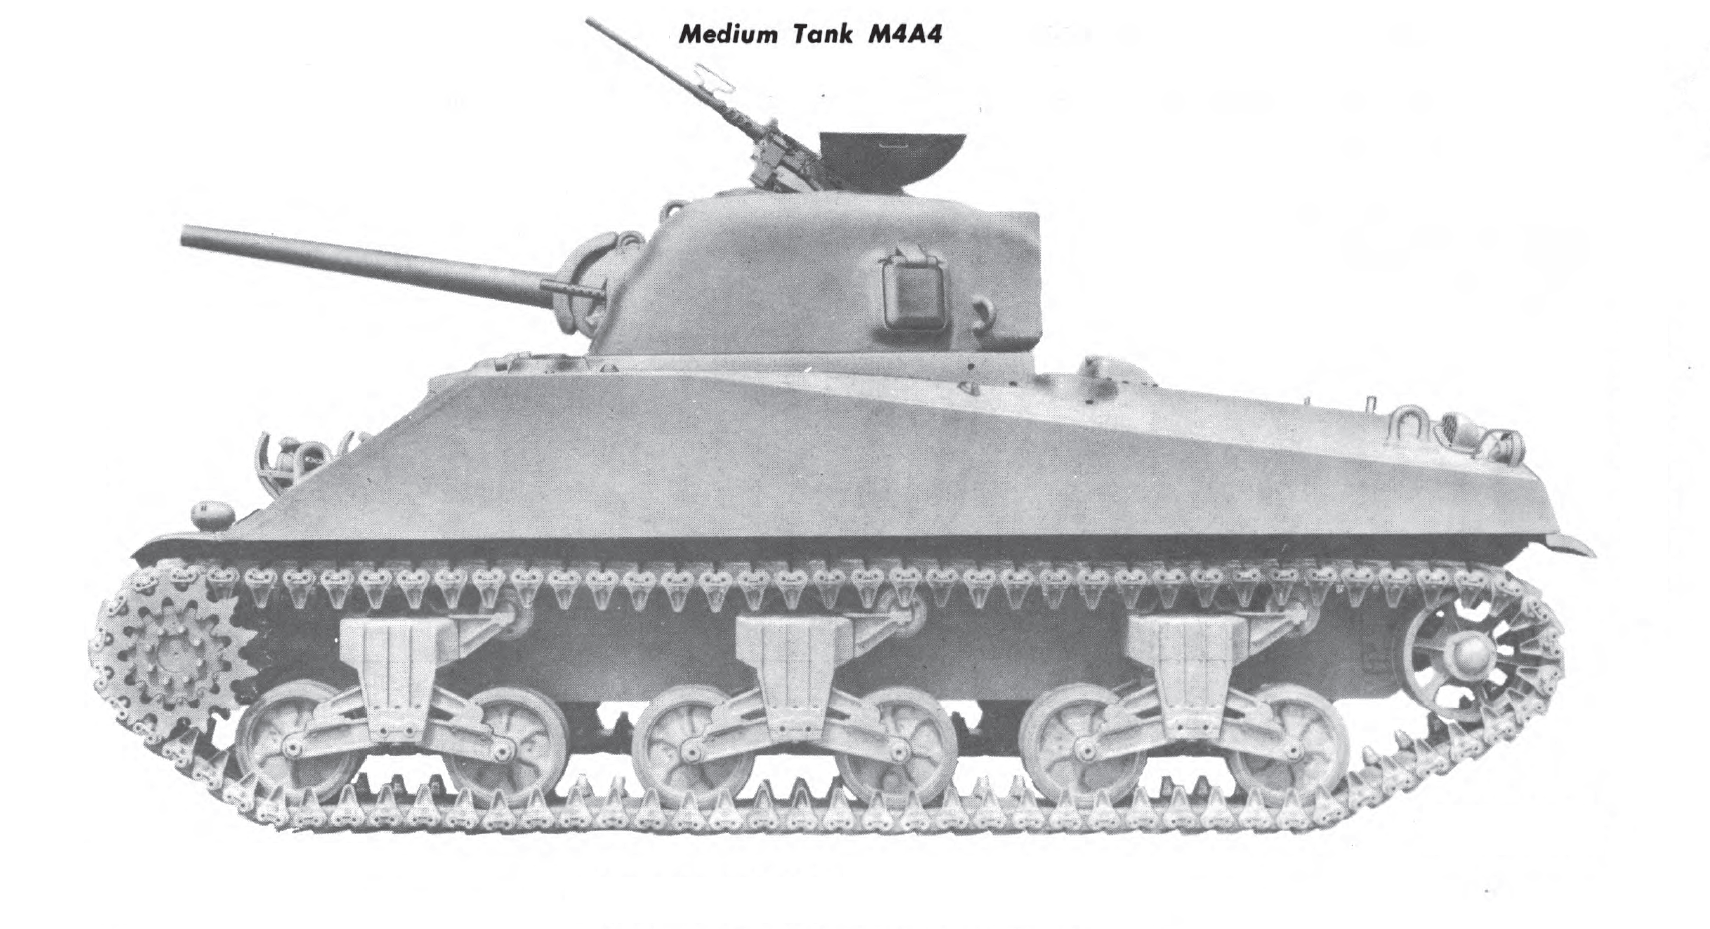 The Sherman M4A4 Medium Tank: Proof Americans can make even crazy